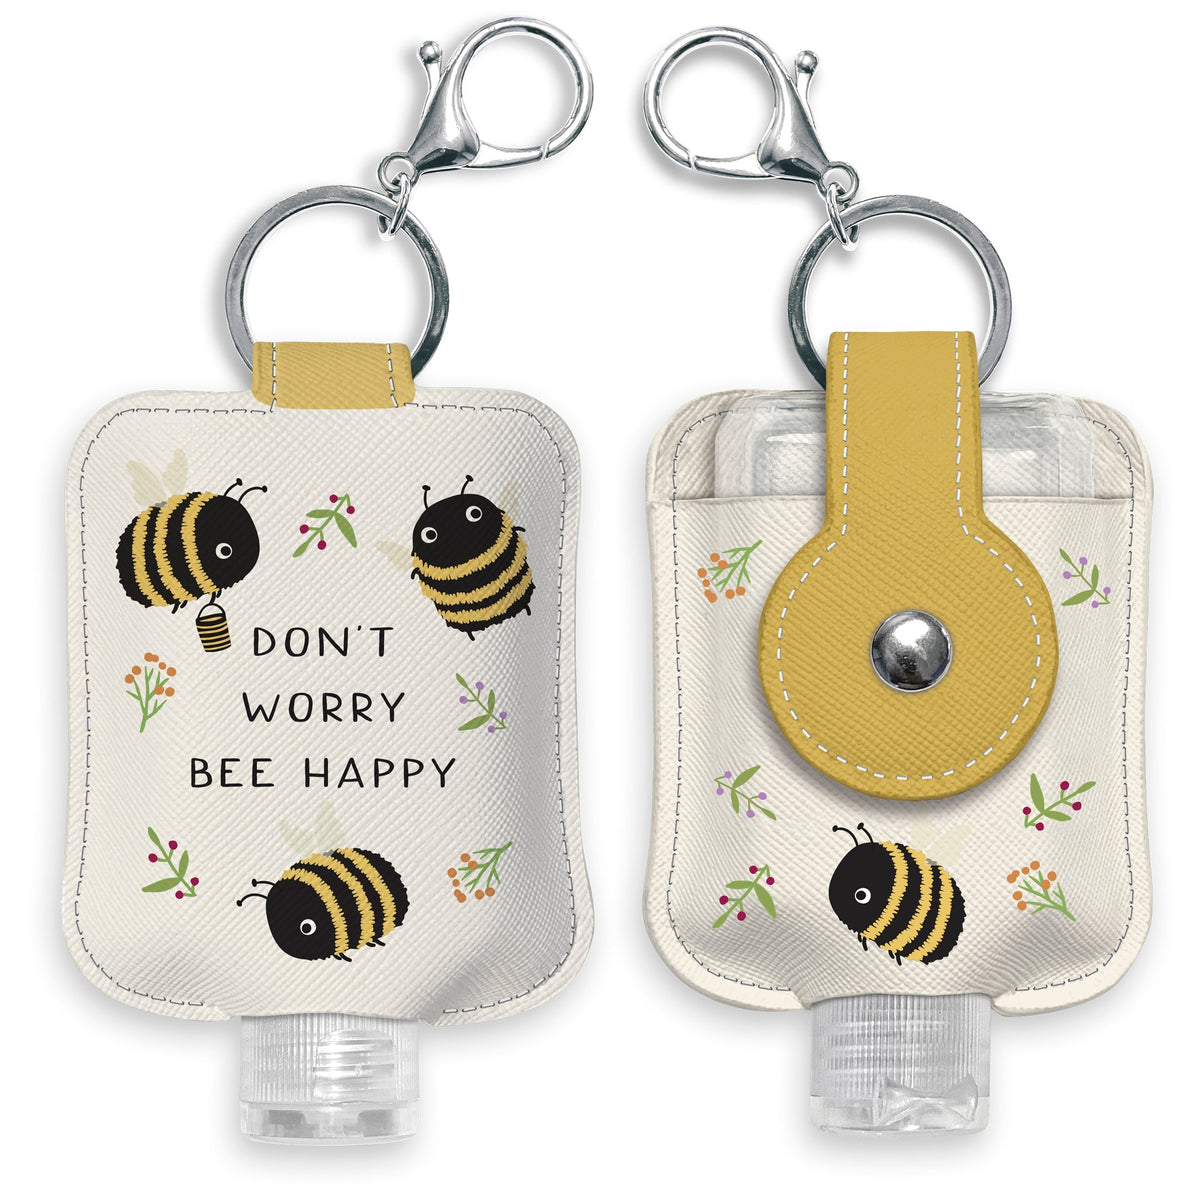 Don't Worry Bee Happy Hand-Sanitizer Holder with Travel Bottle